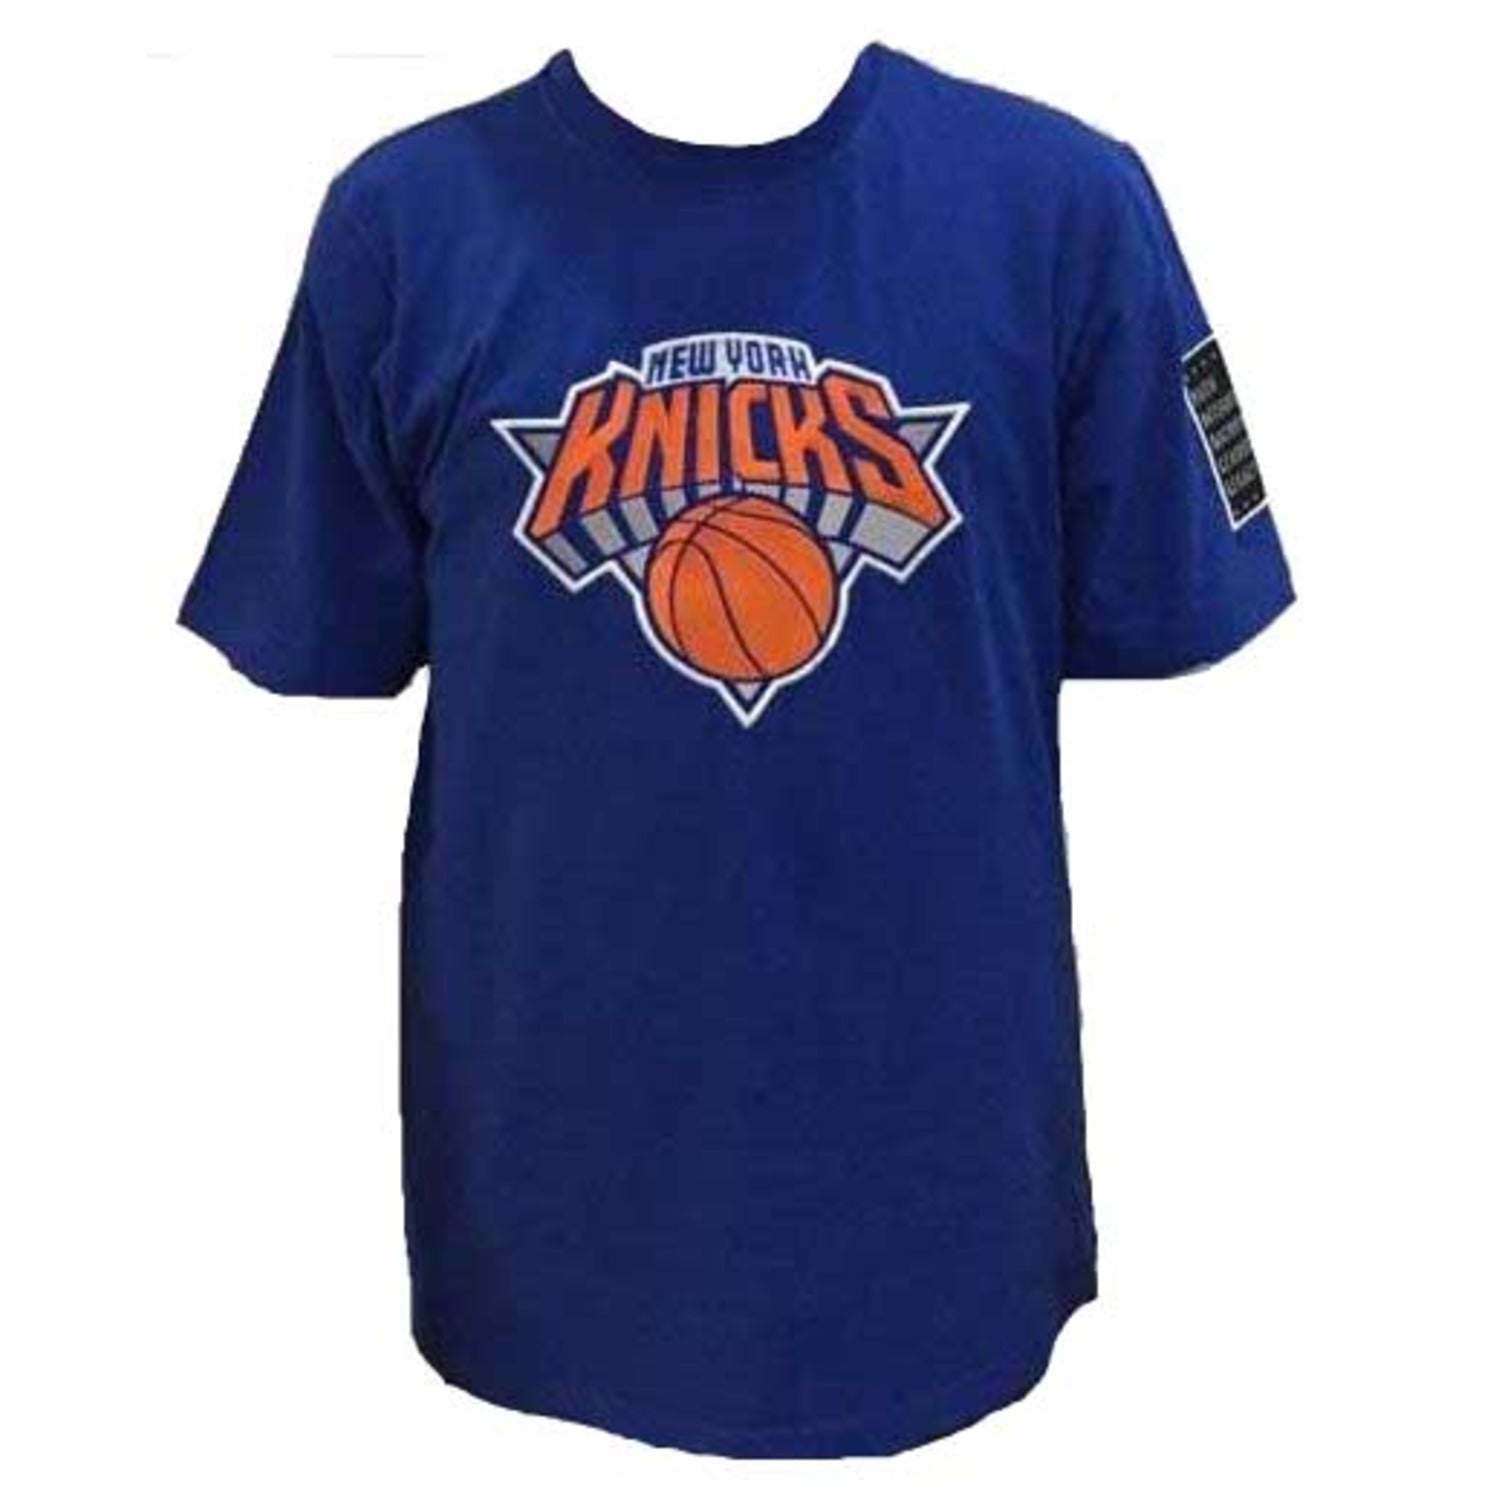 FISLL Knicks Black History Collection Tee